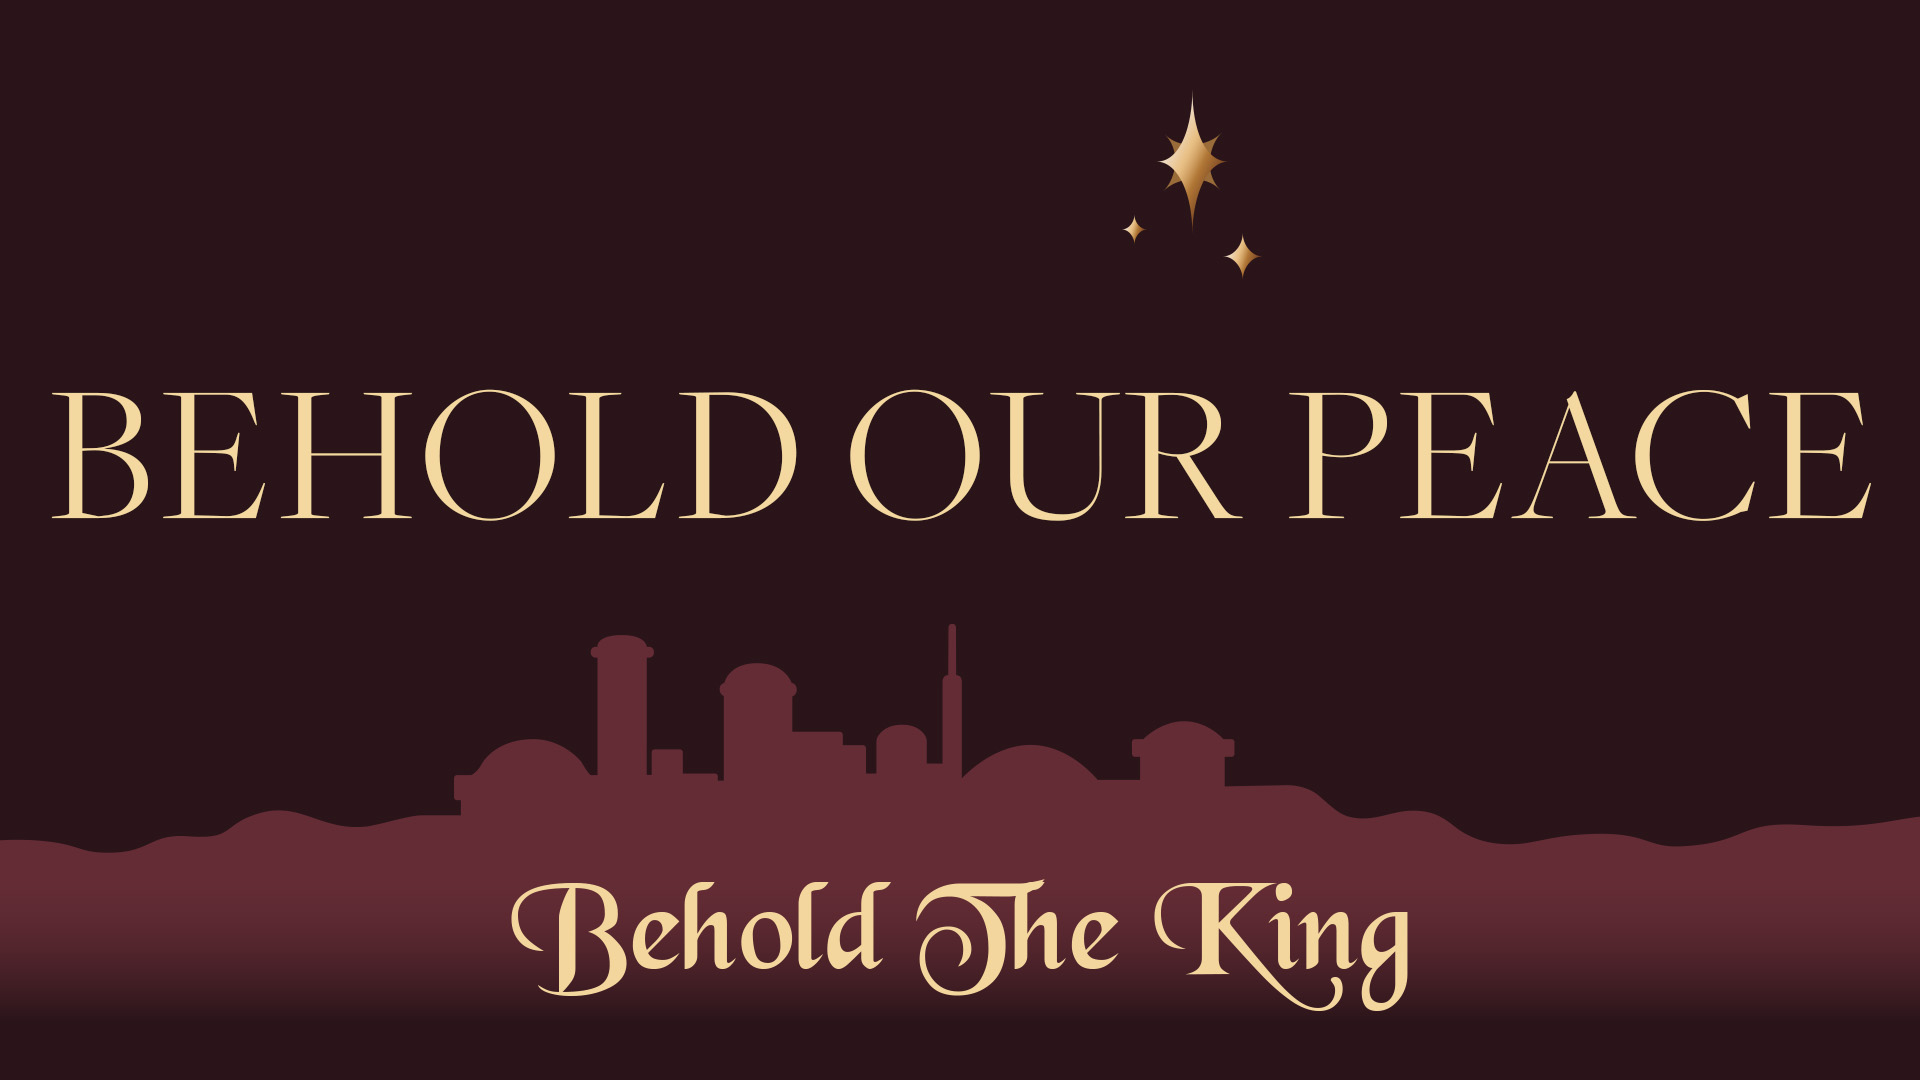 Behold Our Peace